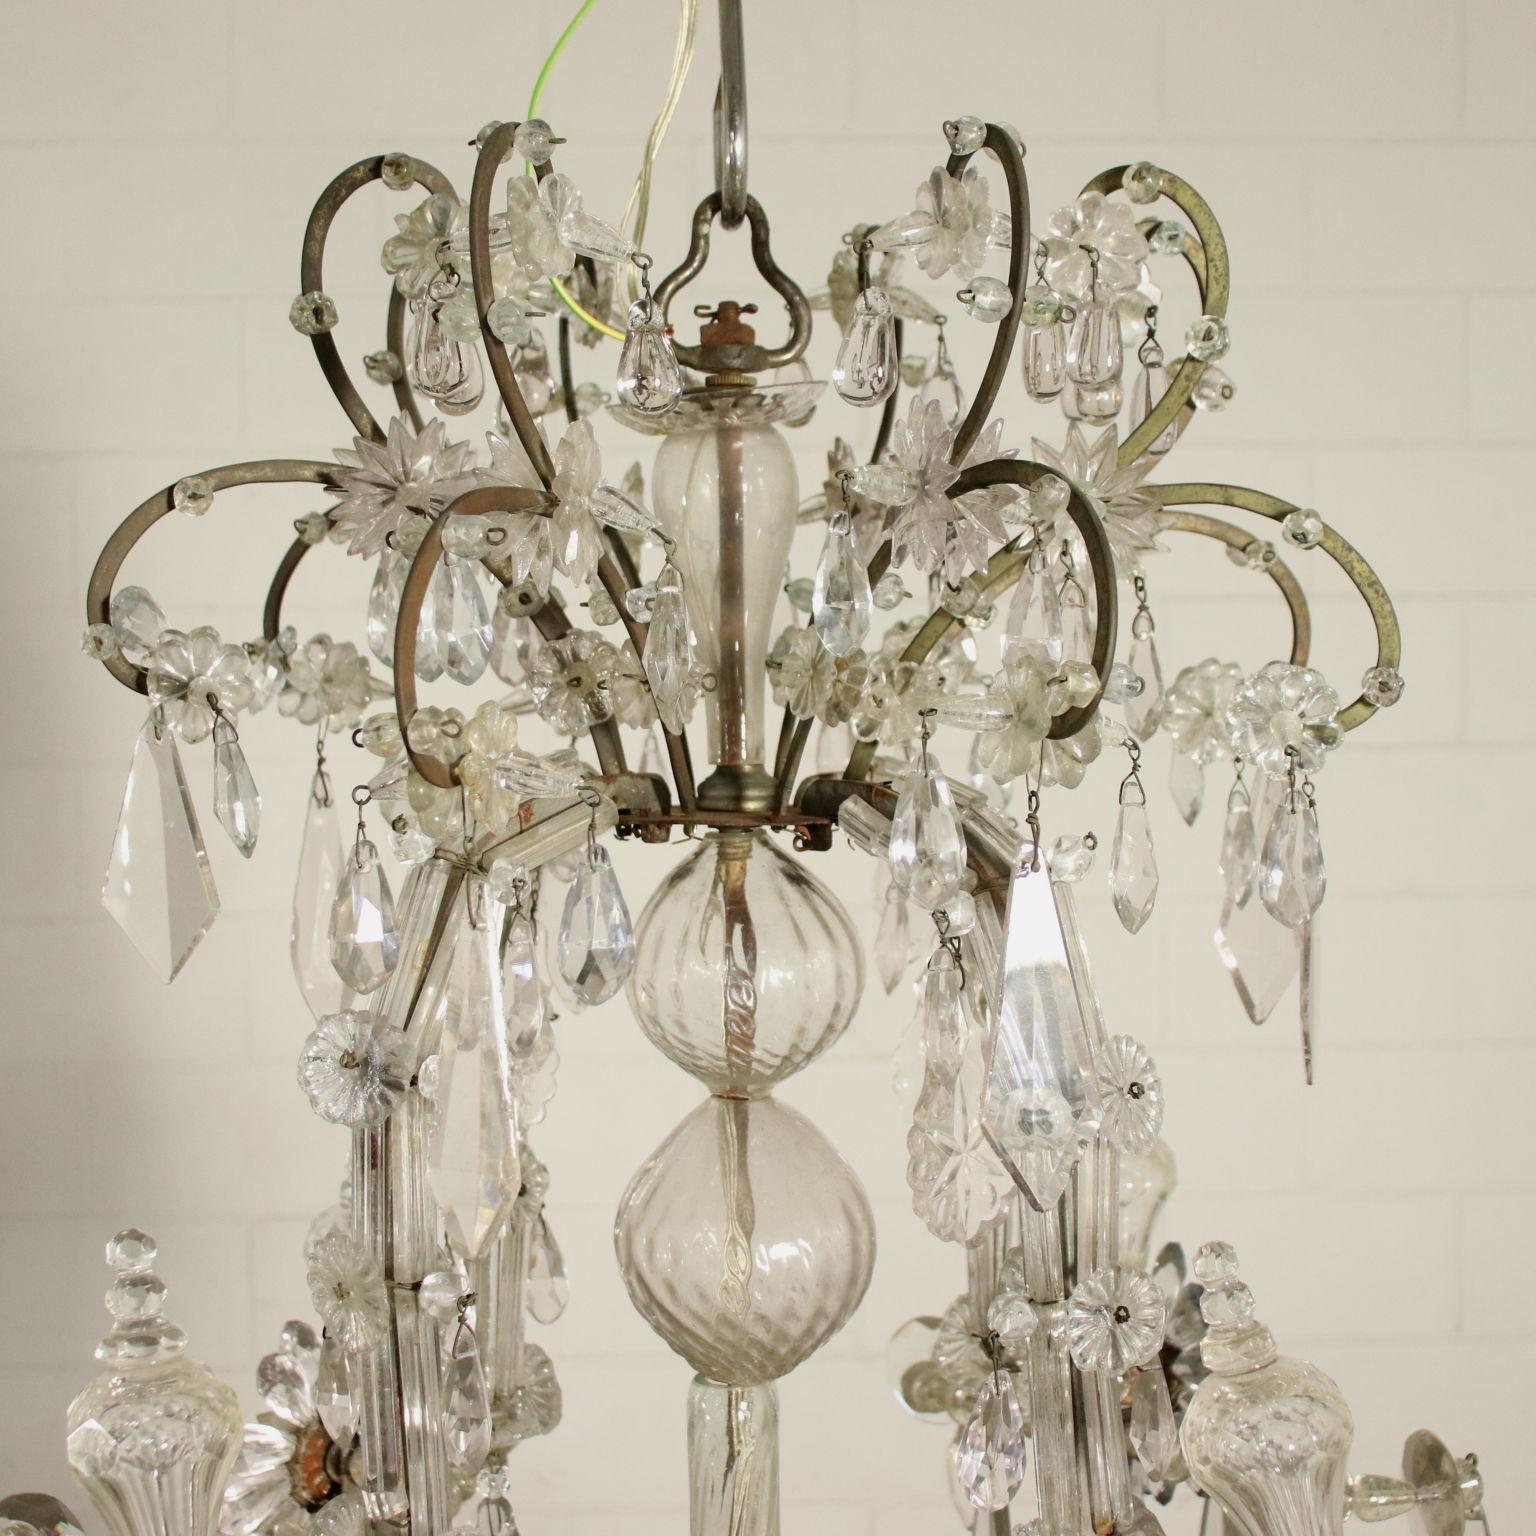 Italian Chandelier Maria Theresa Iron Bronze Glass, Italy, Late 18th Century For Sale